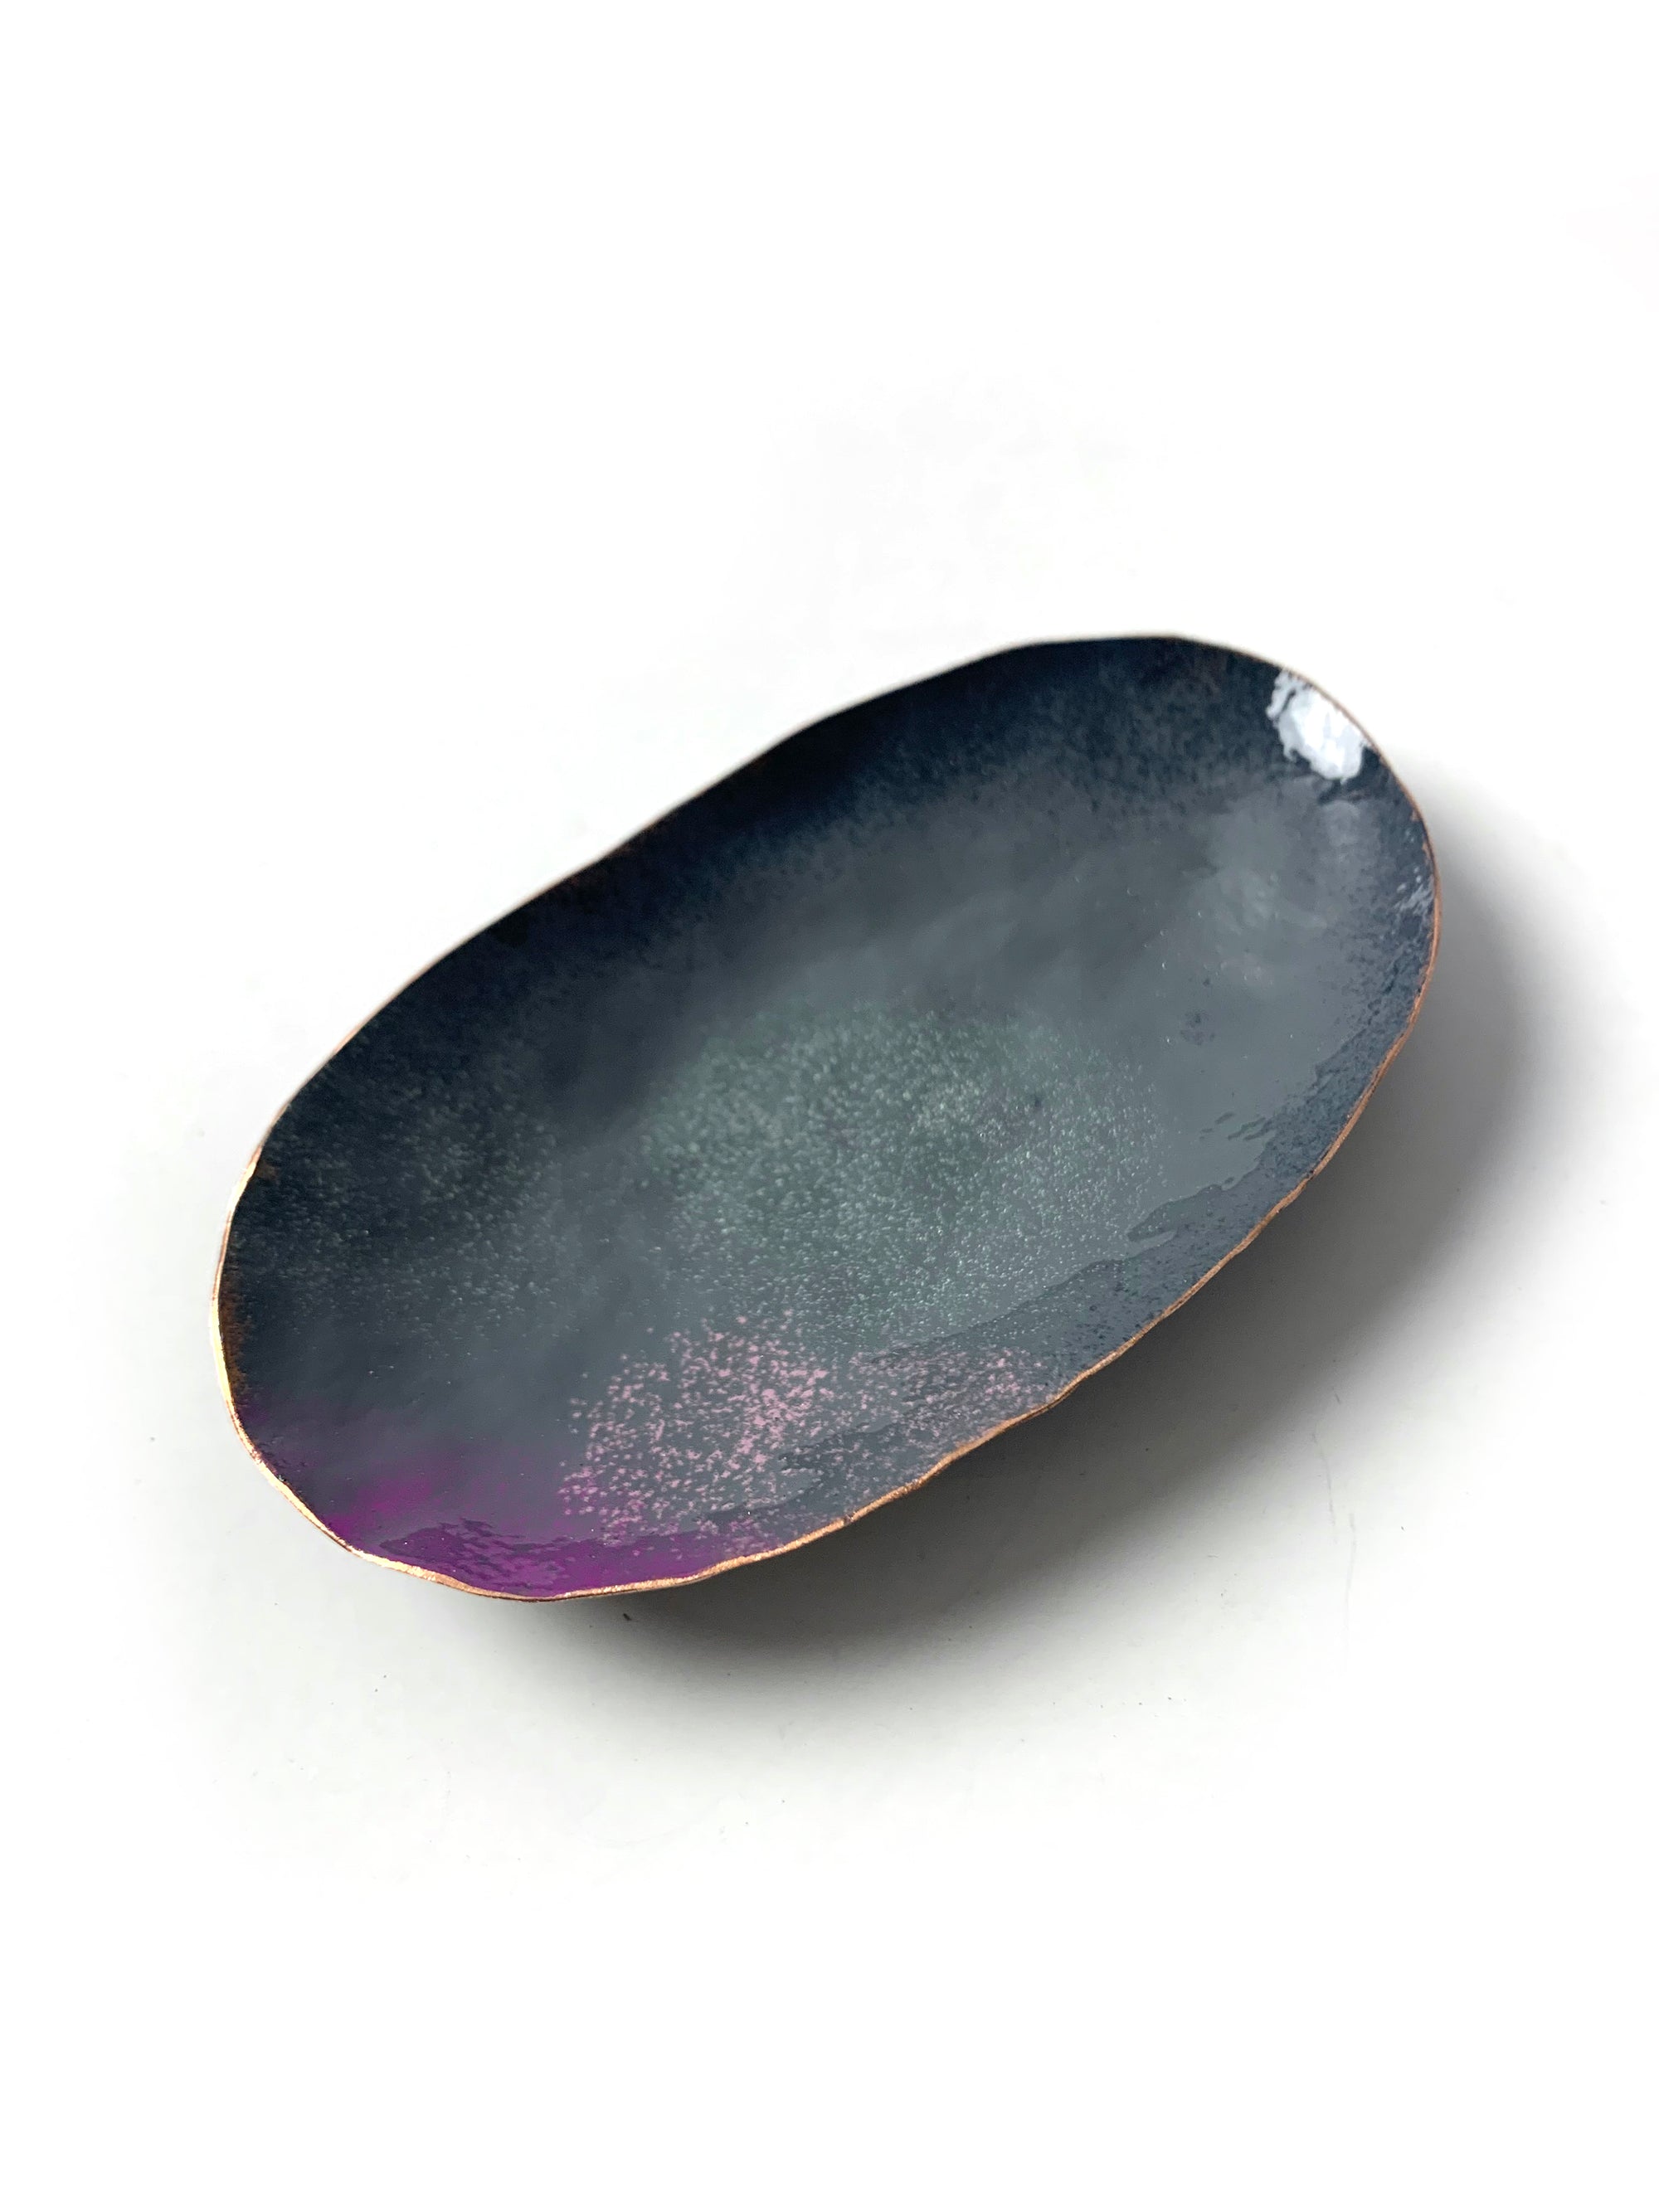 Oval Copper Dish in Storm Grey and Radiant Orchid